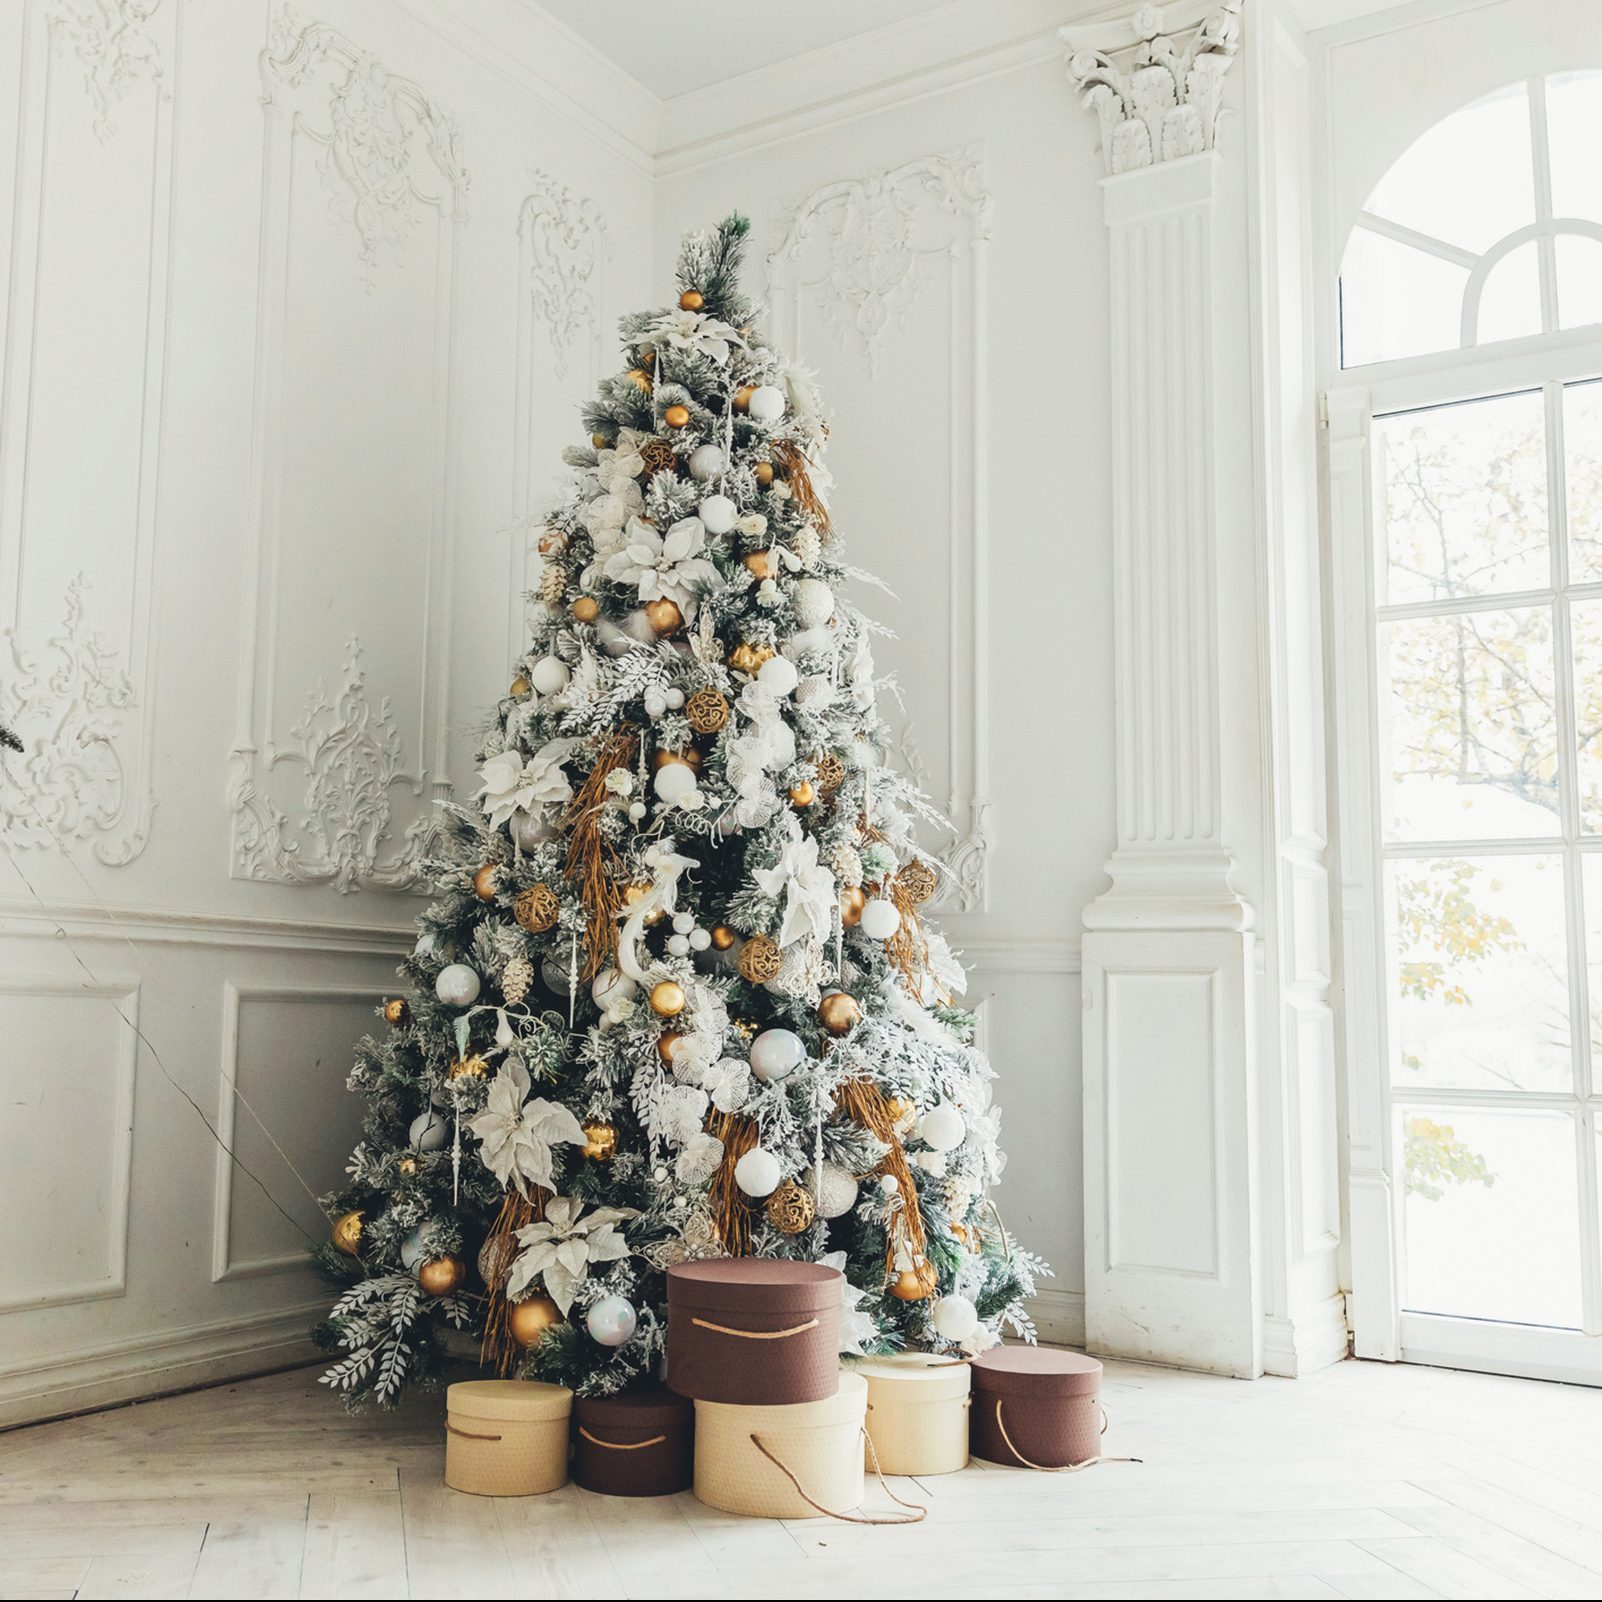 Classic christmas New Year decorated interior room New year tree. Christmas tree with gold decorations